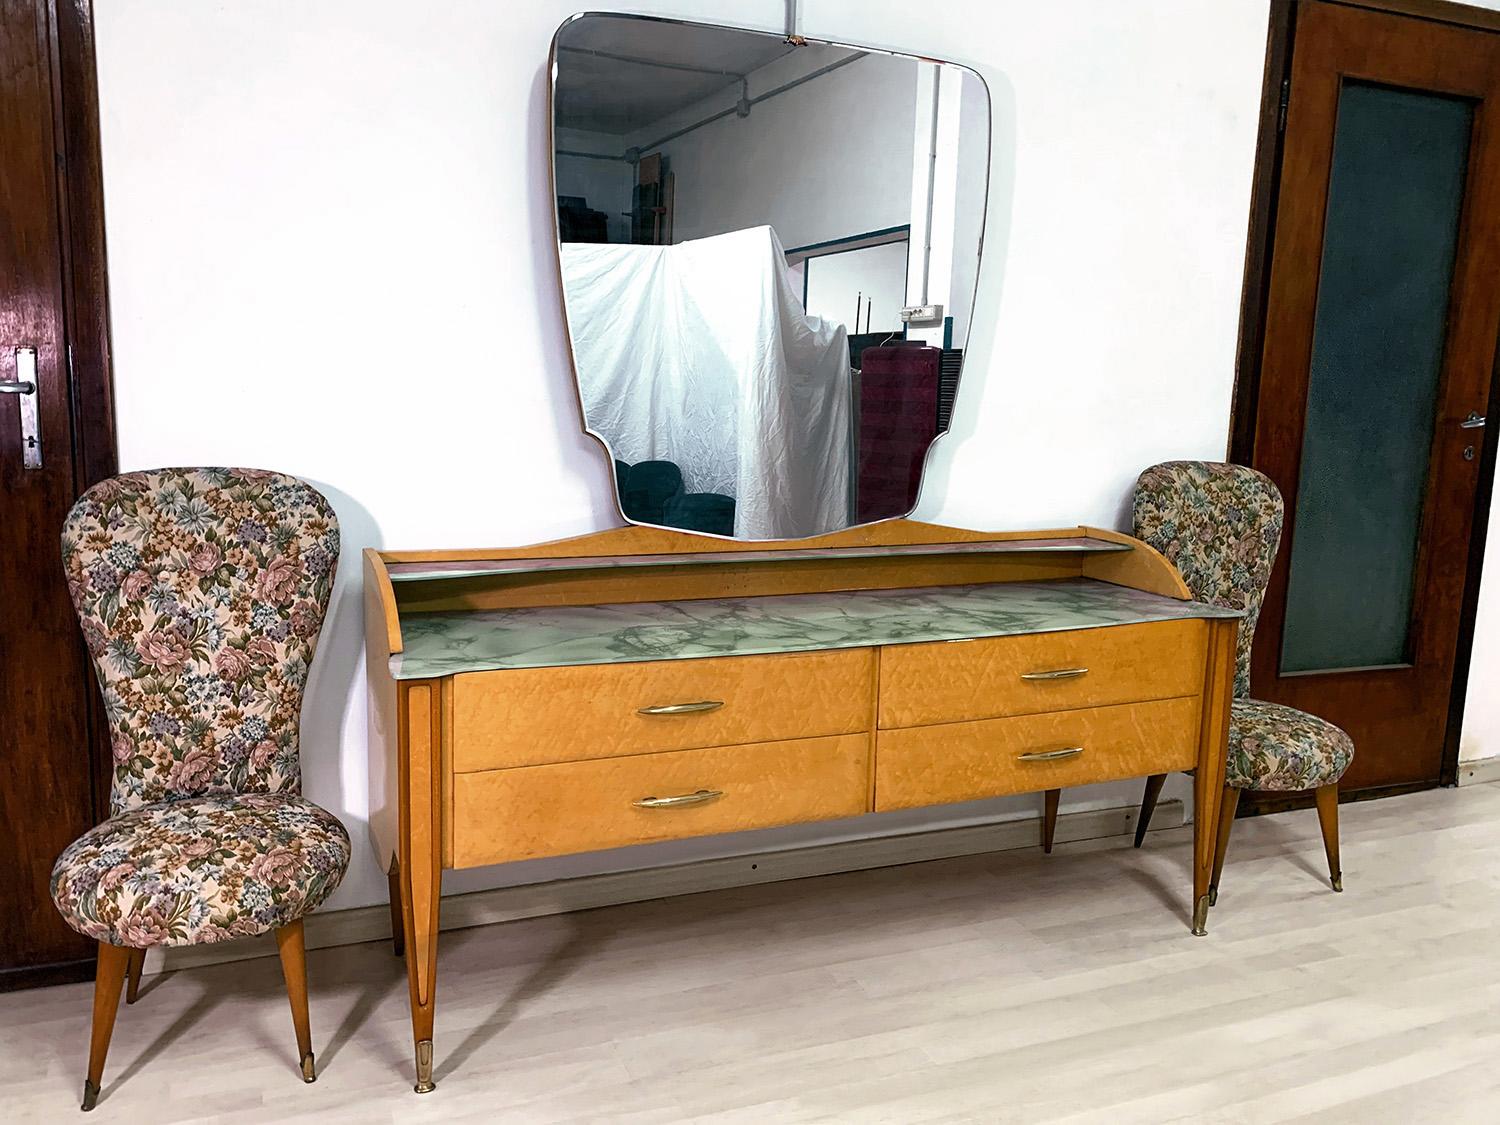 Italian Mid-Century Chest of Drawers with Mirror Gio Ponti Style, 1950's For Sale 7